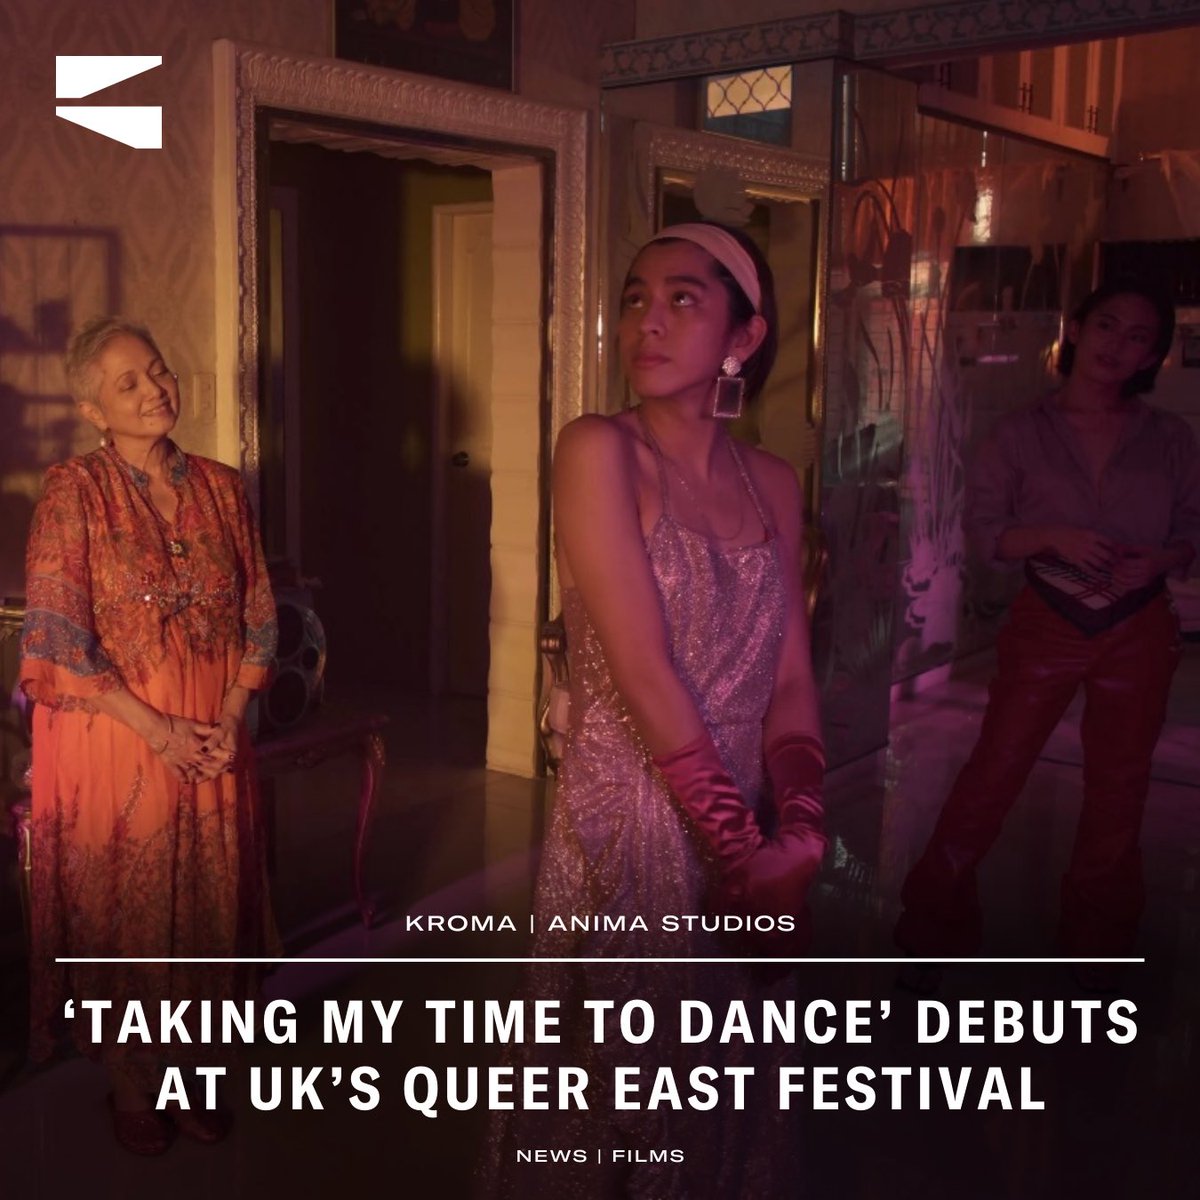 The @animastudiosph short film “Taking My Time To Dance” starring, written, and directed by Celeste Lapida has finally made its world premiere! Selected for the UK’s Queer East Film Festival, it appears in the Jason Tan Liwag-curated program “Bakla Bakla Paano Ka Ginawa.”